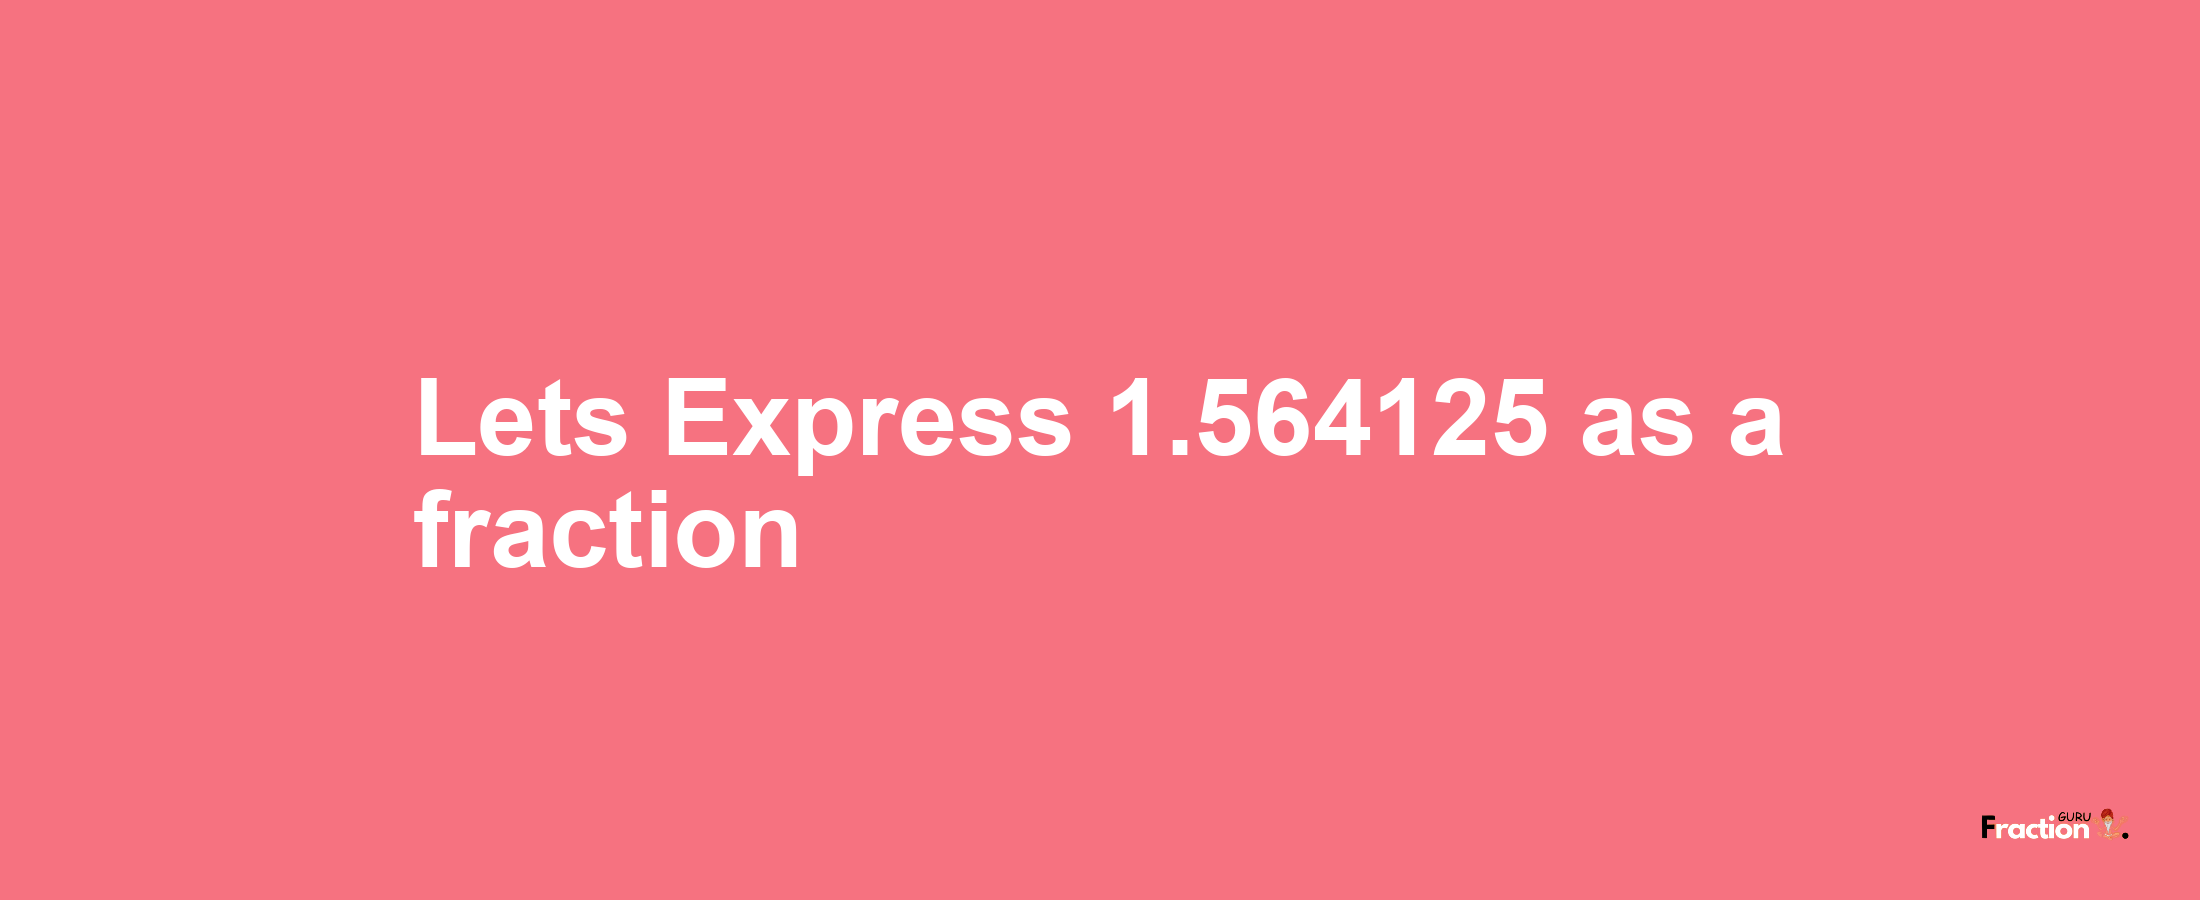 Lets Express 1.564125 as afraction